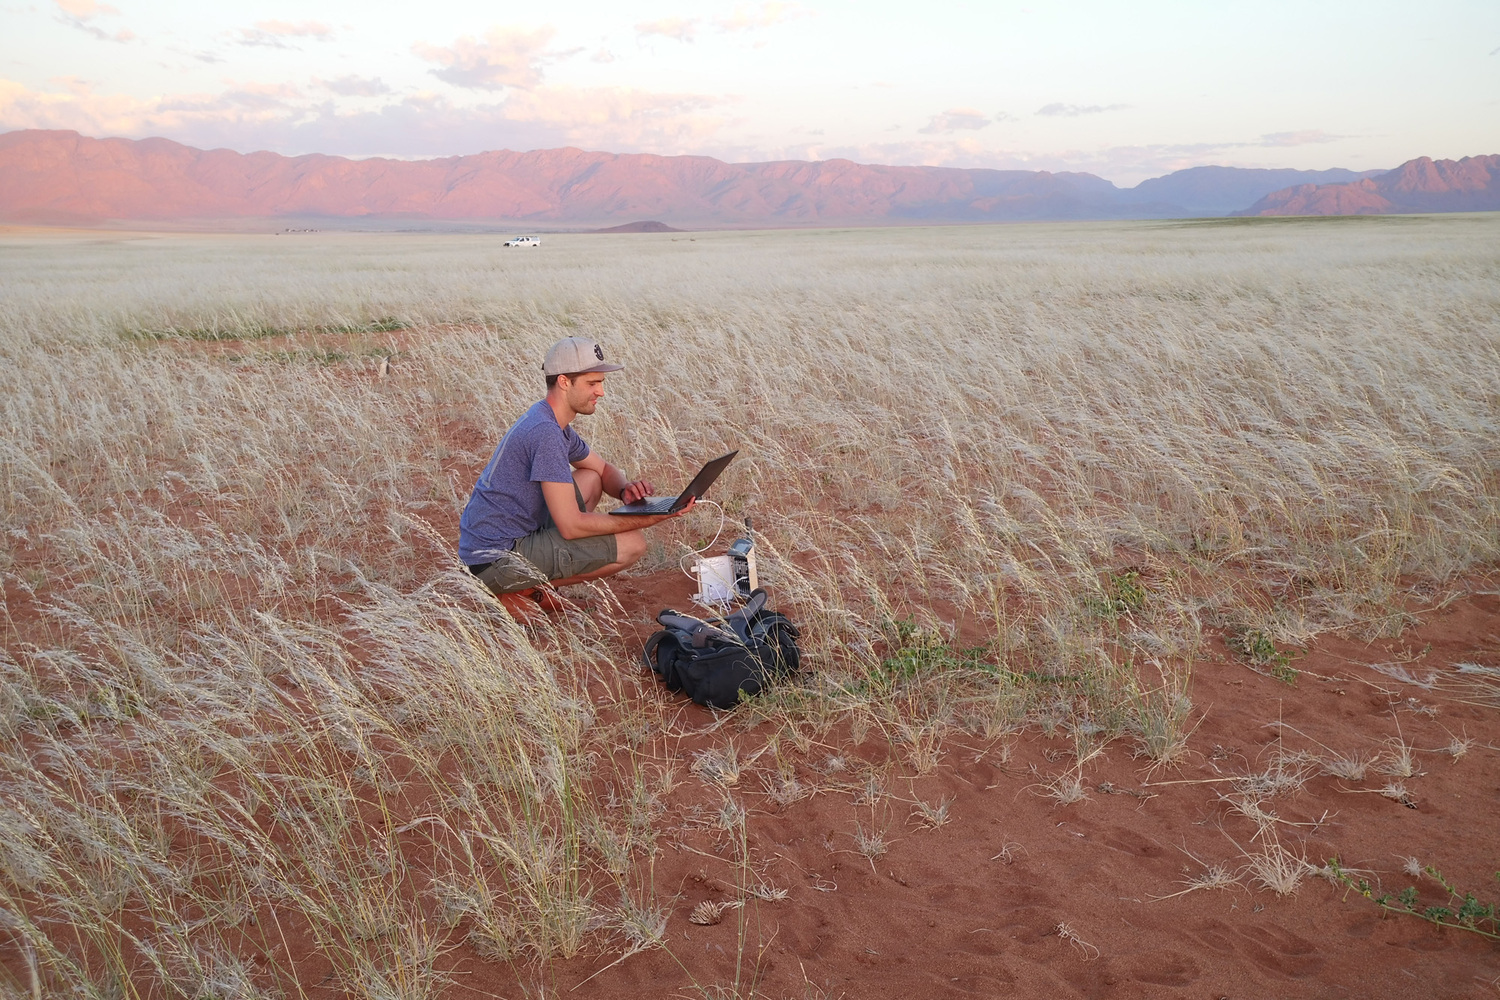 Co-author, Sönke Holch, downloading data from a data logger in the Namib in February 2021 when the grasses reached their peak biomass.